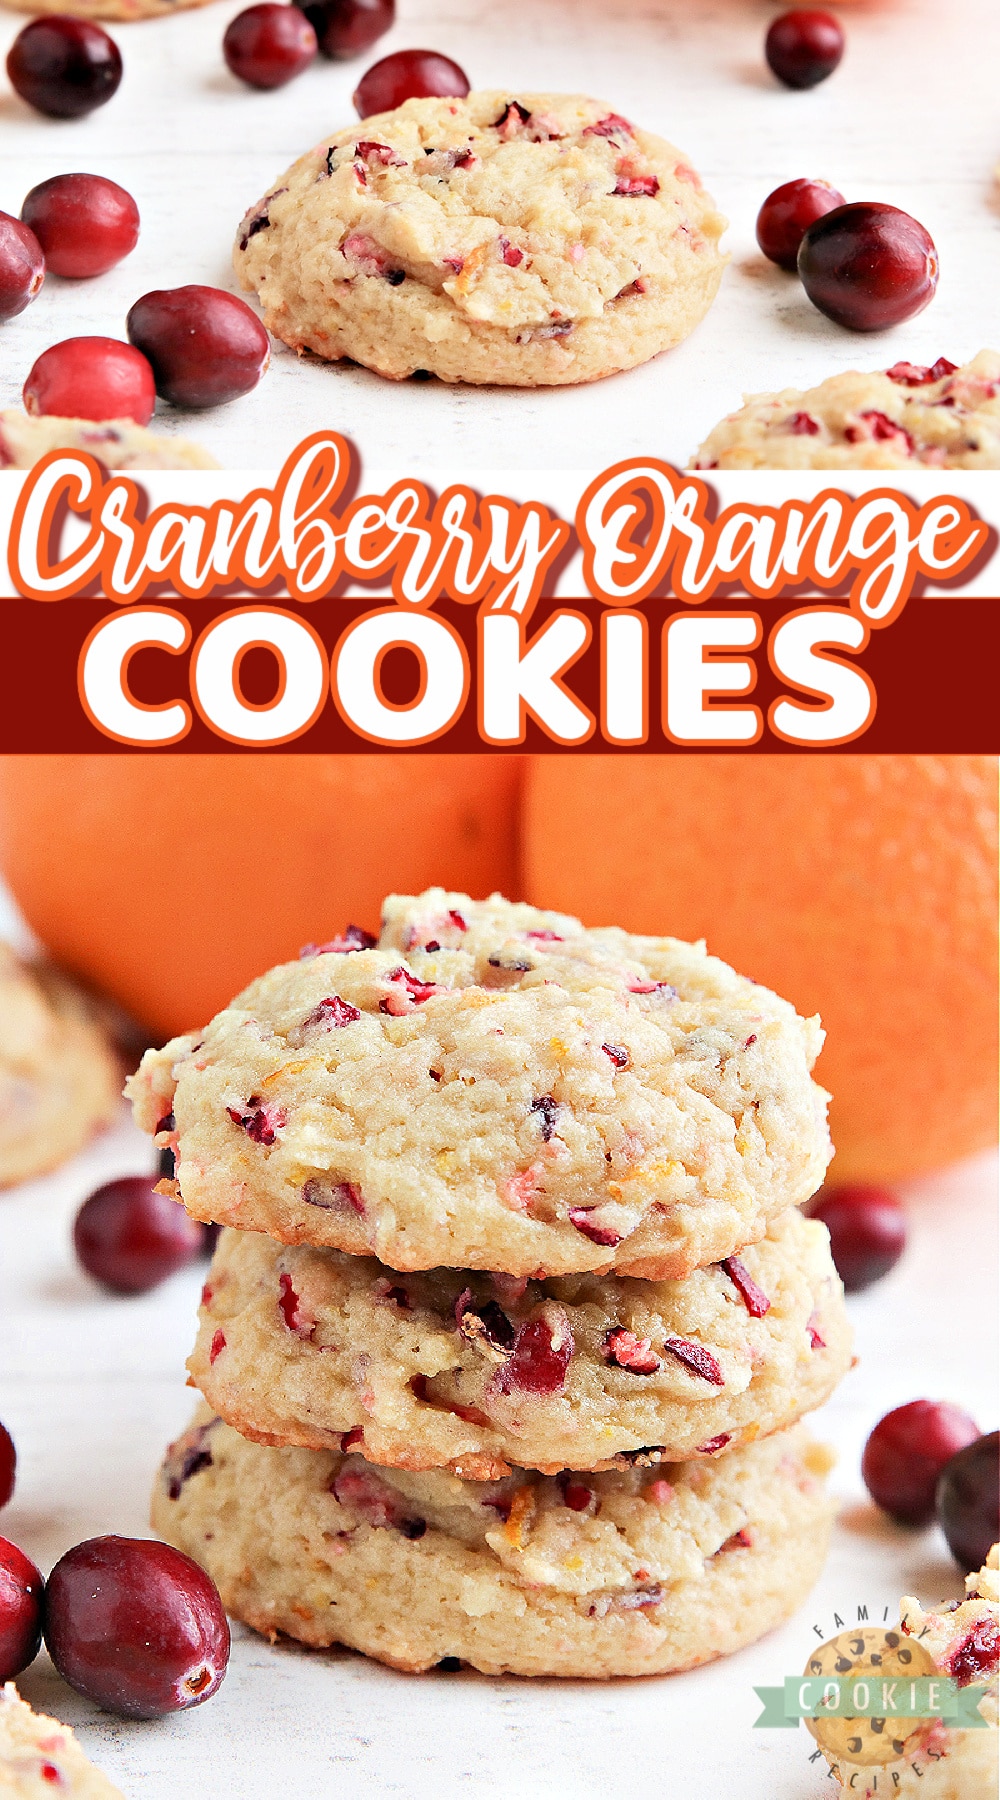 Cranberry Orange Cookies are soft, chewy and packed with citrus orange flavor and fresh cranberries. These cranberry cookies are a fantastic and tasty treat for the Fall season! via @buttergirls